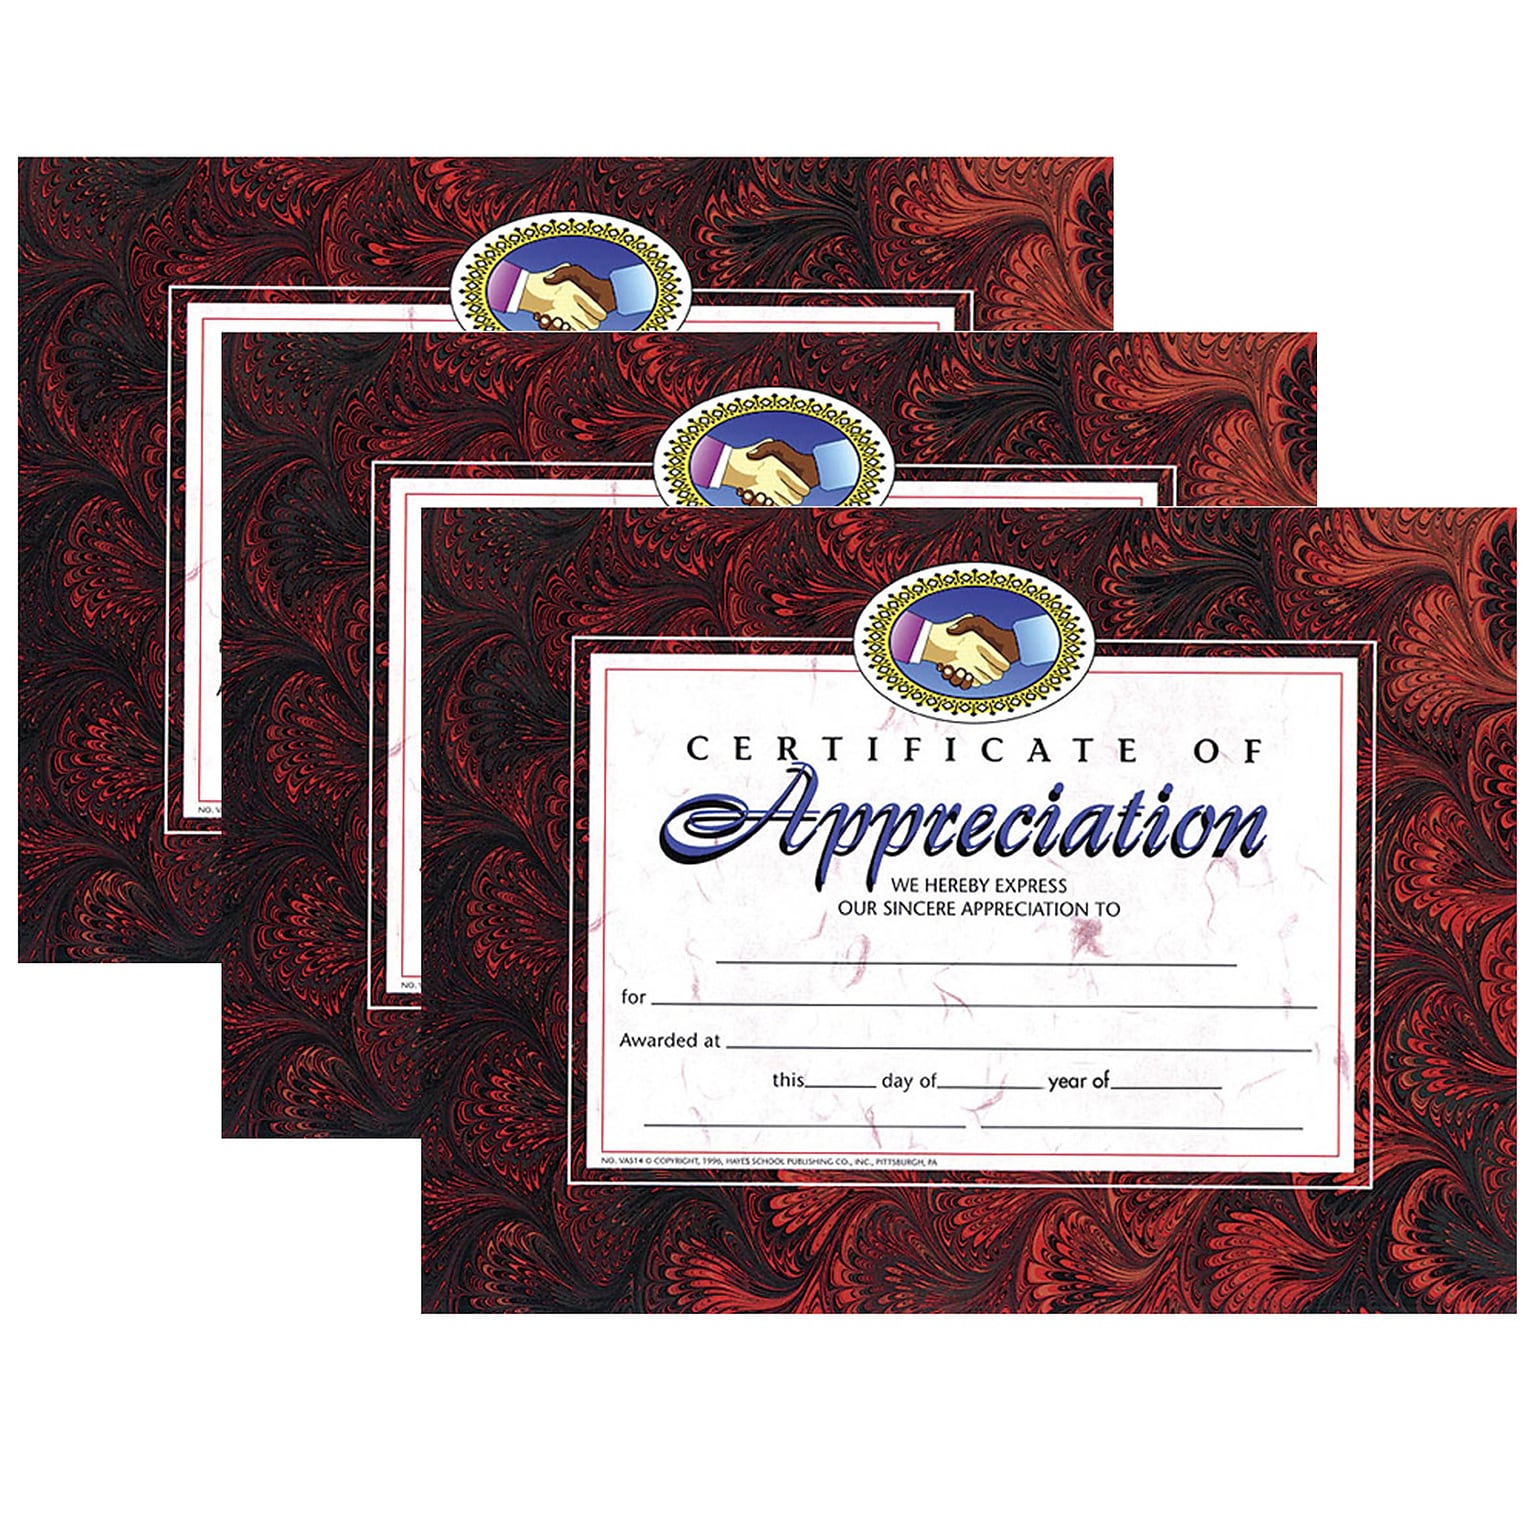 Hayes Publishing Certificate of Appreciation, 8.5 x 11, 30/Pack, 3 Packs (H-VA514-3)